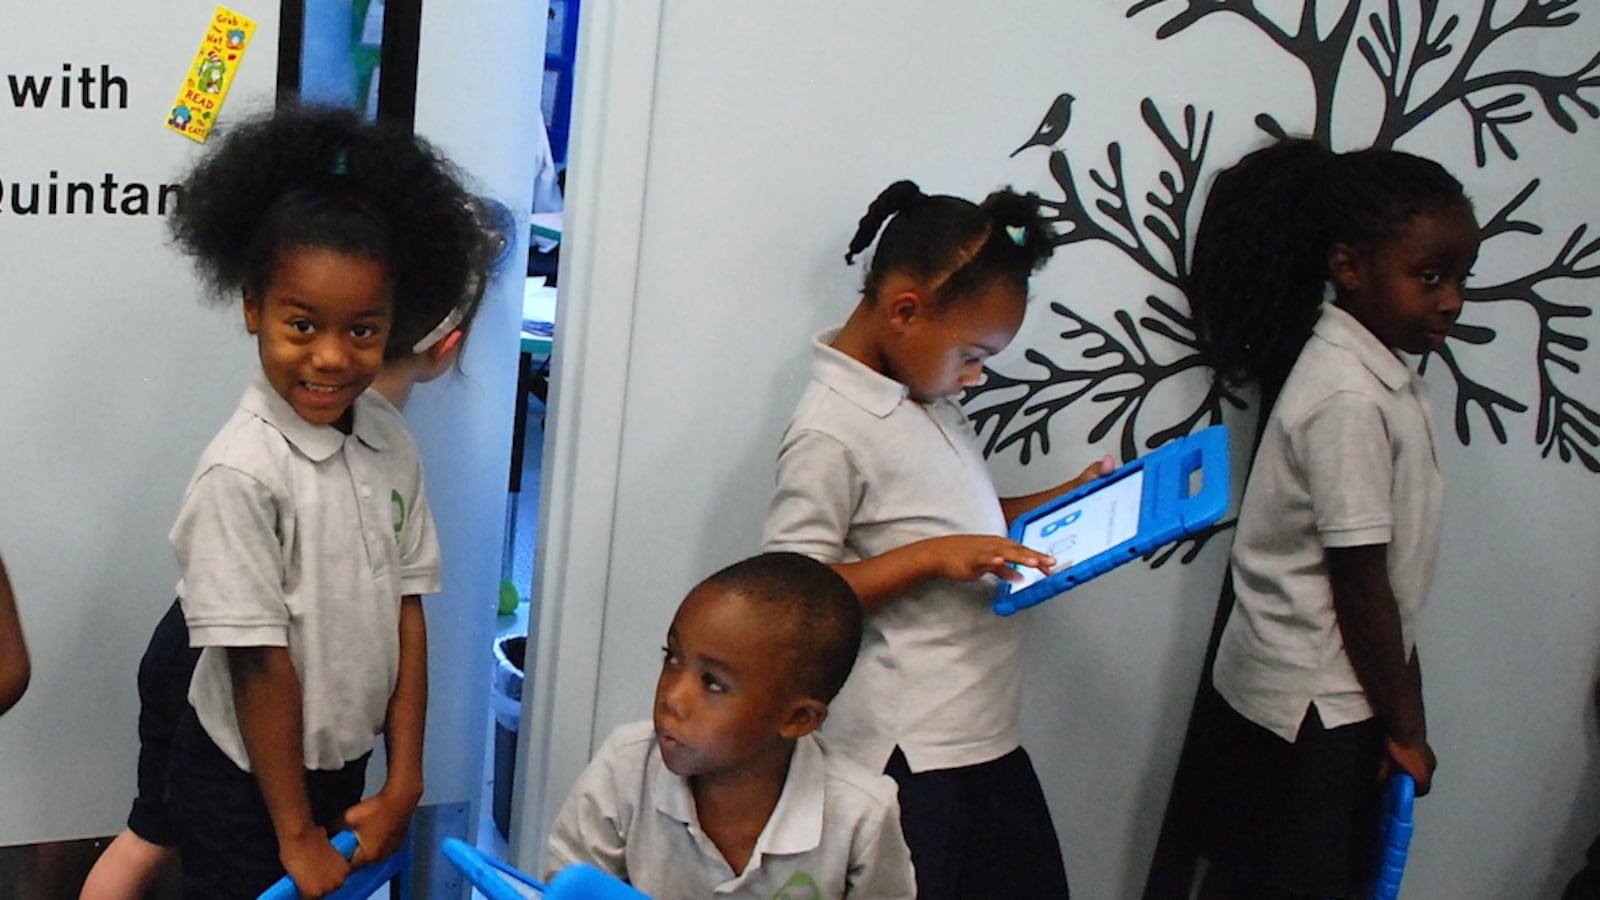 Roots Elementary students hold iPads as they stand in line to go into one of the school's mini-classrooms.